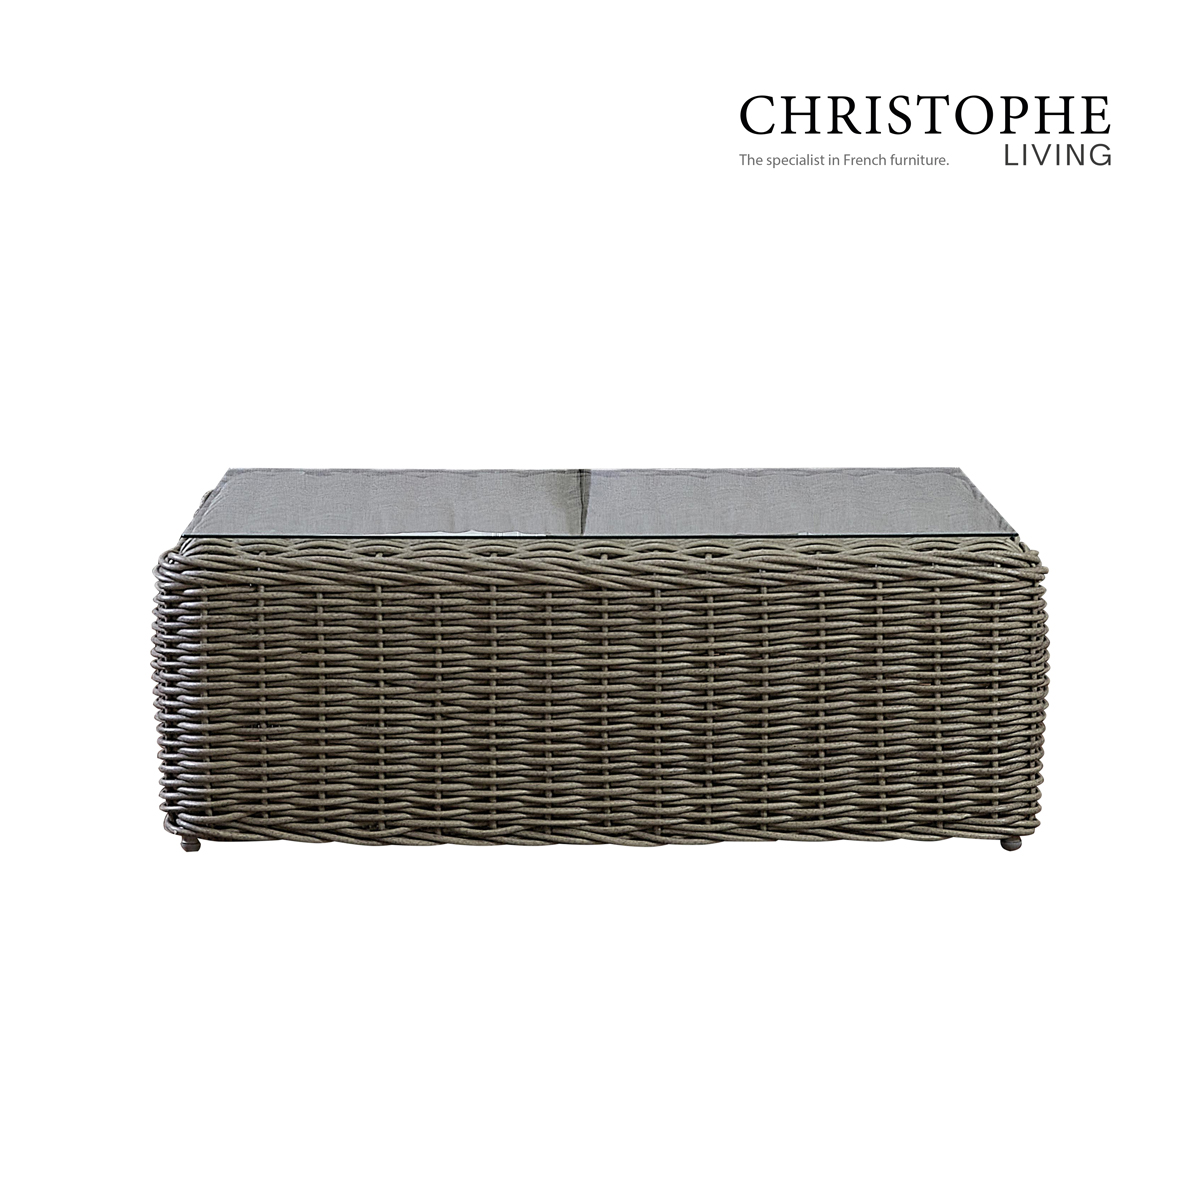 Manly French Provincial Synthetic Rattan Coffee Table with Glass Top in French Grey